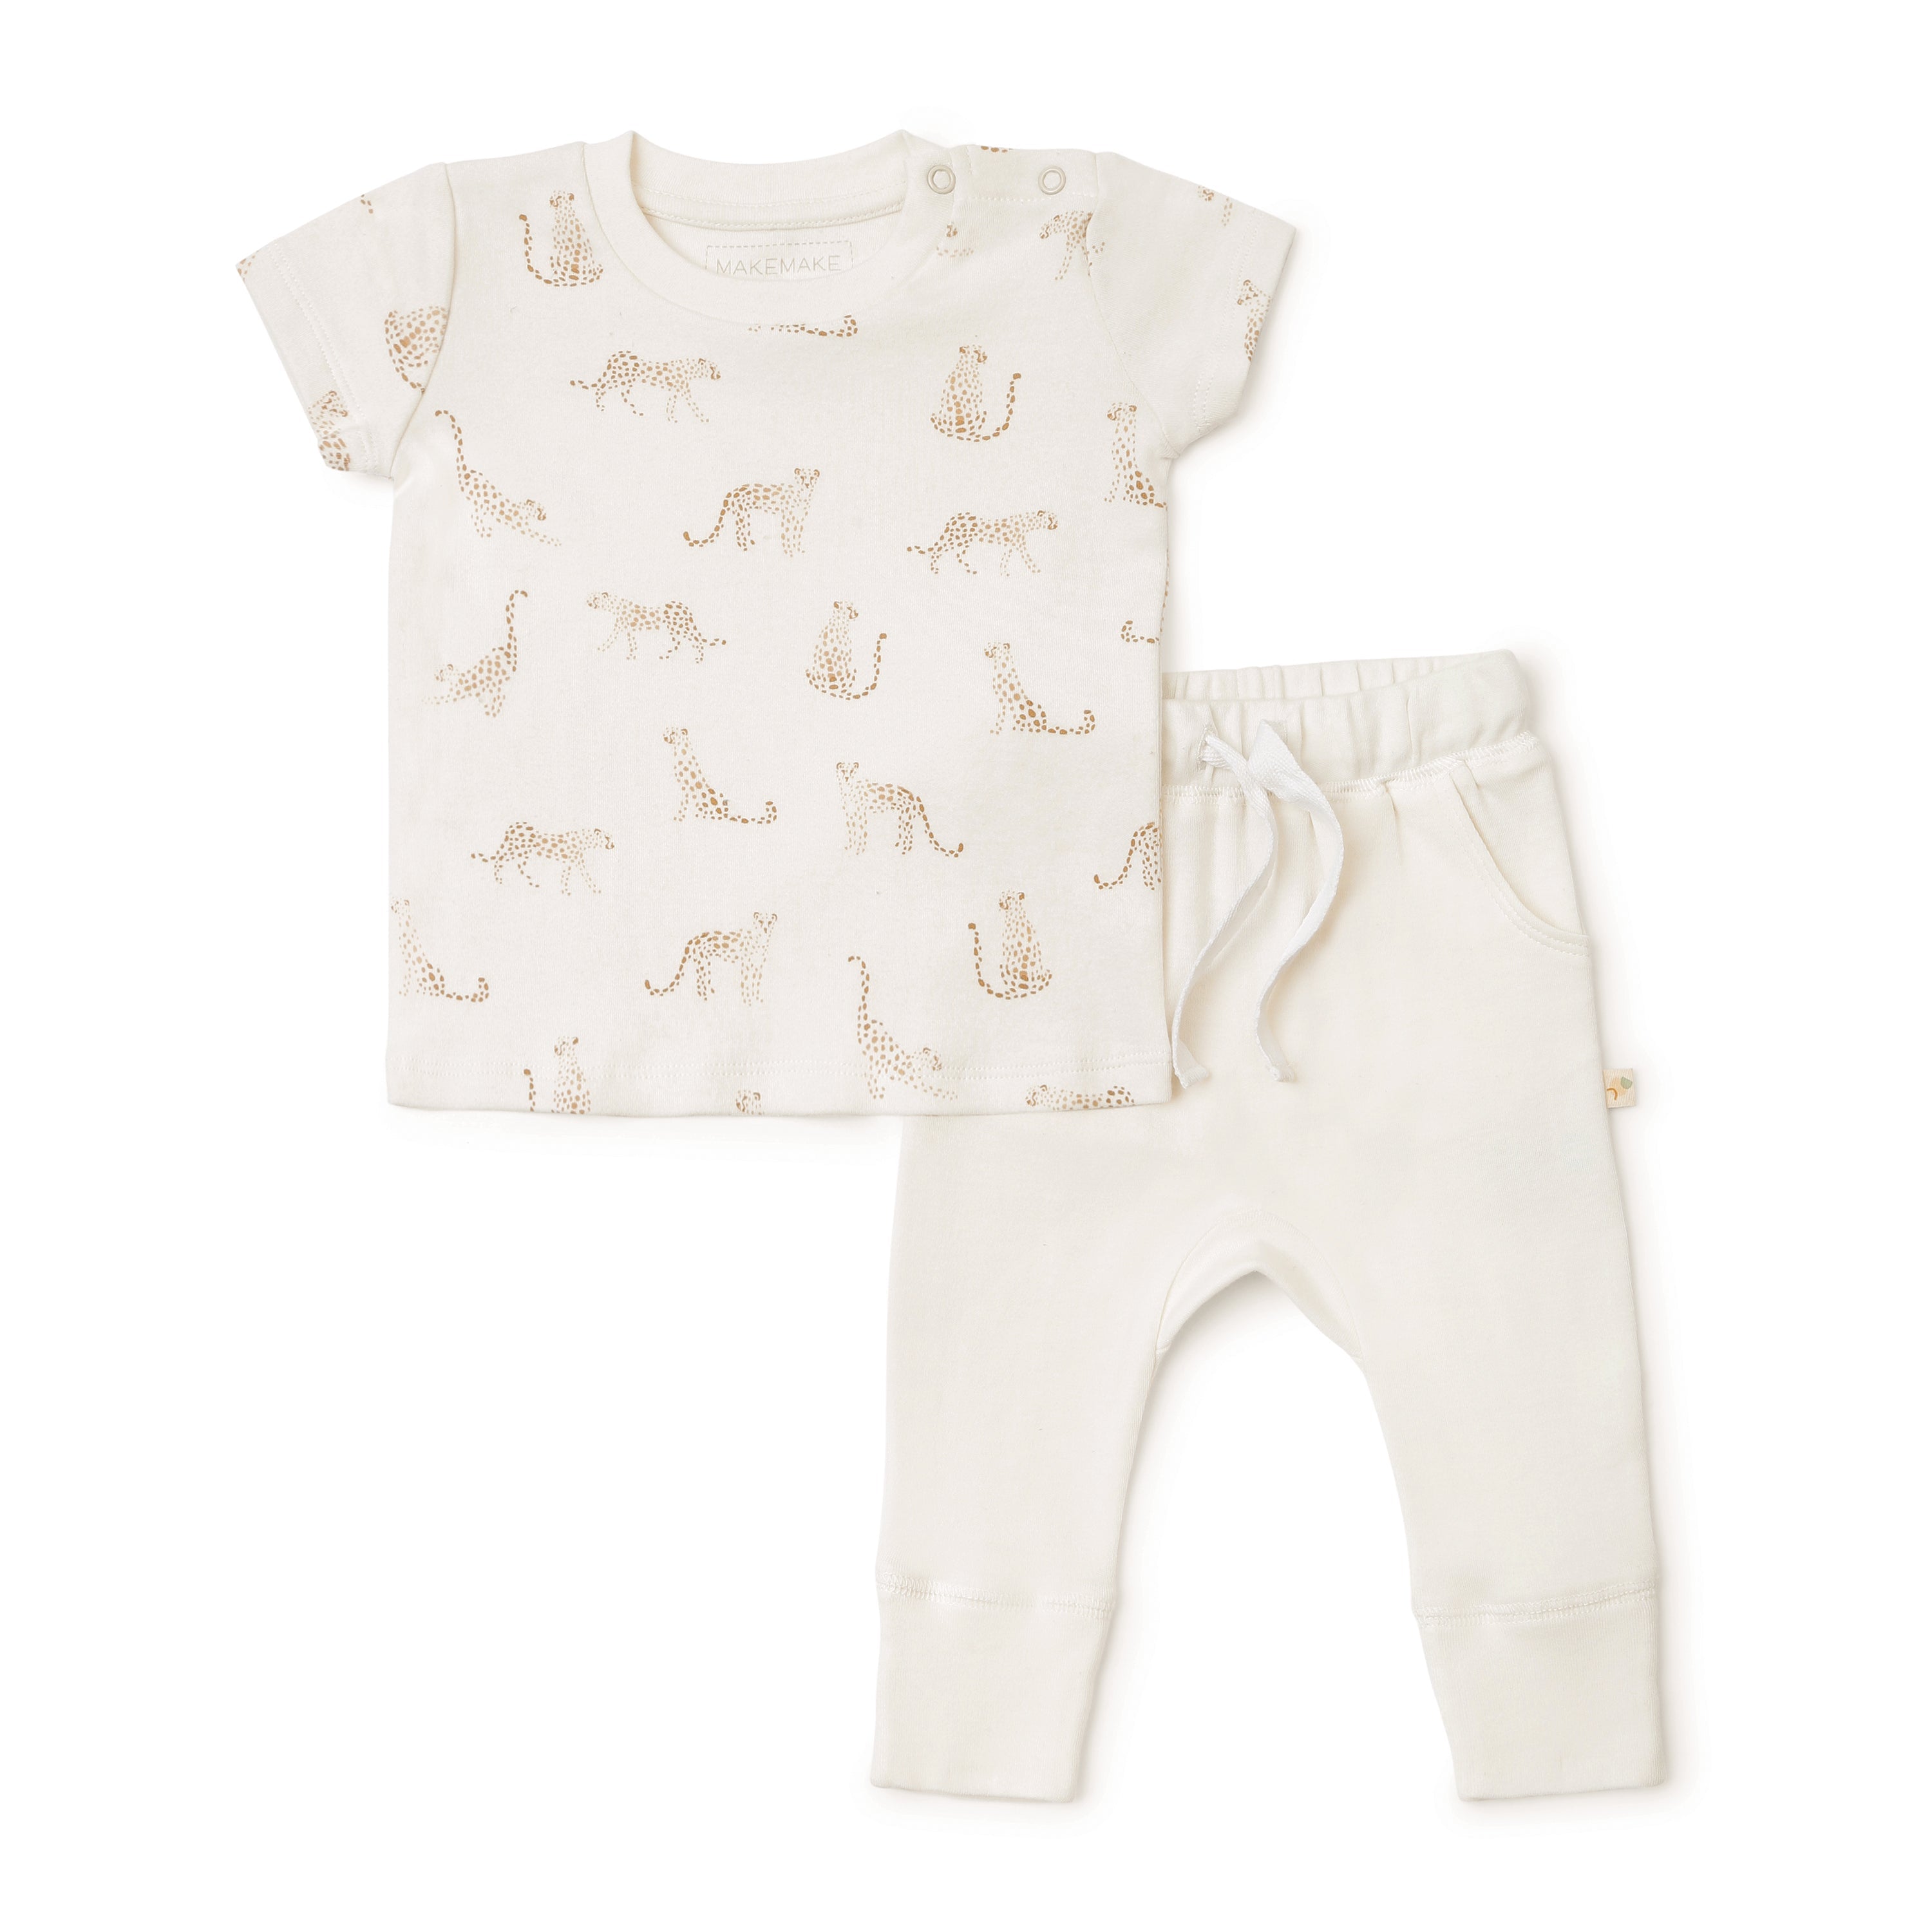 A baby outfit from Organic Kids comprising an Organic Tee & Pants Set - Wildcat Print, featuring a white short-sleeved shirt and matching pants adorned with a pattern of golden giraffes. The shirt features two shoulder buttons.